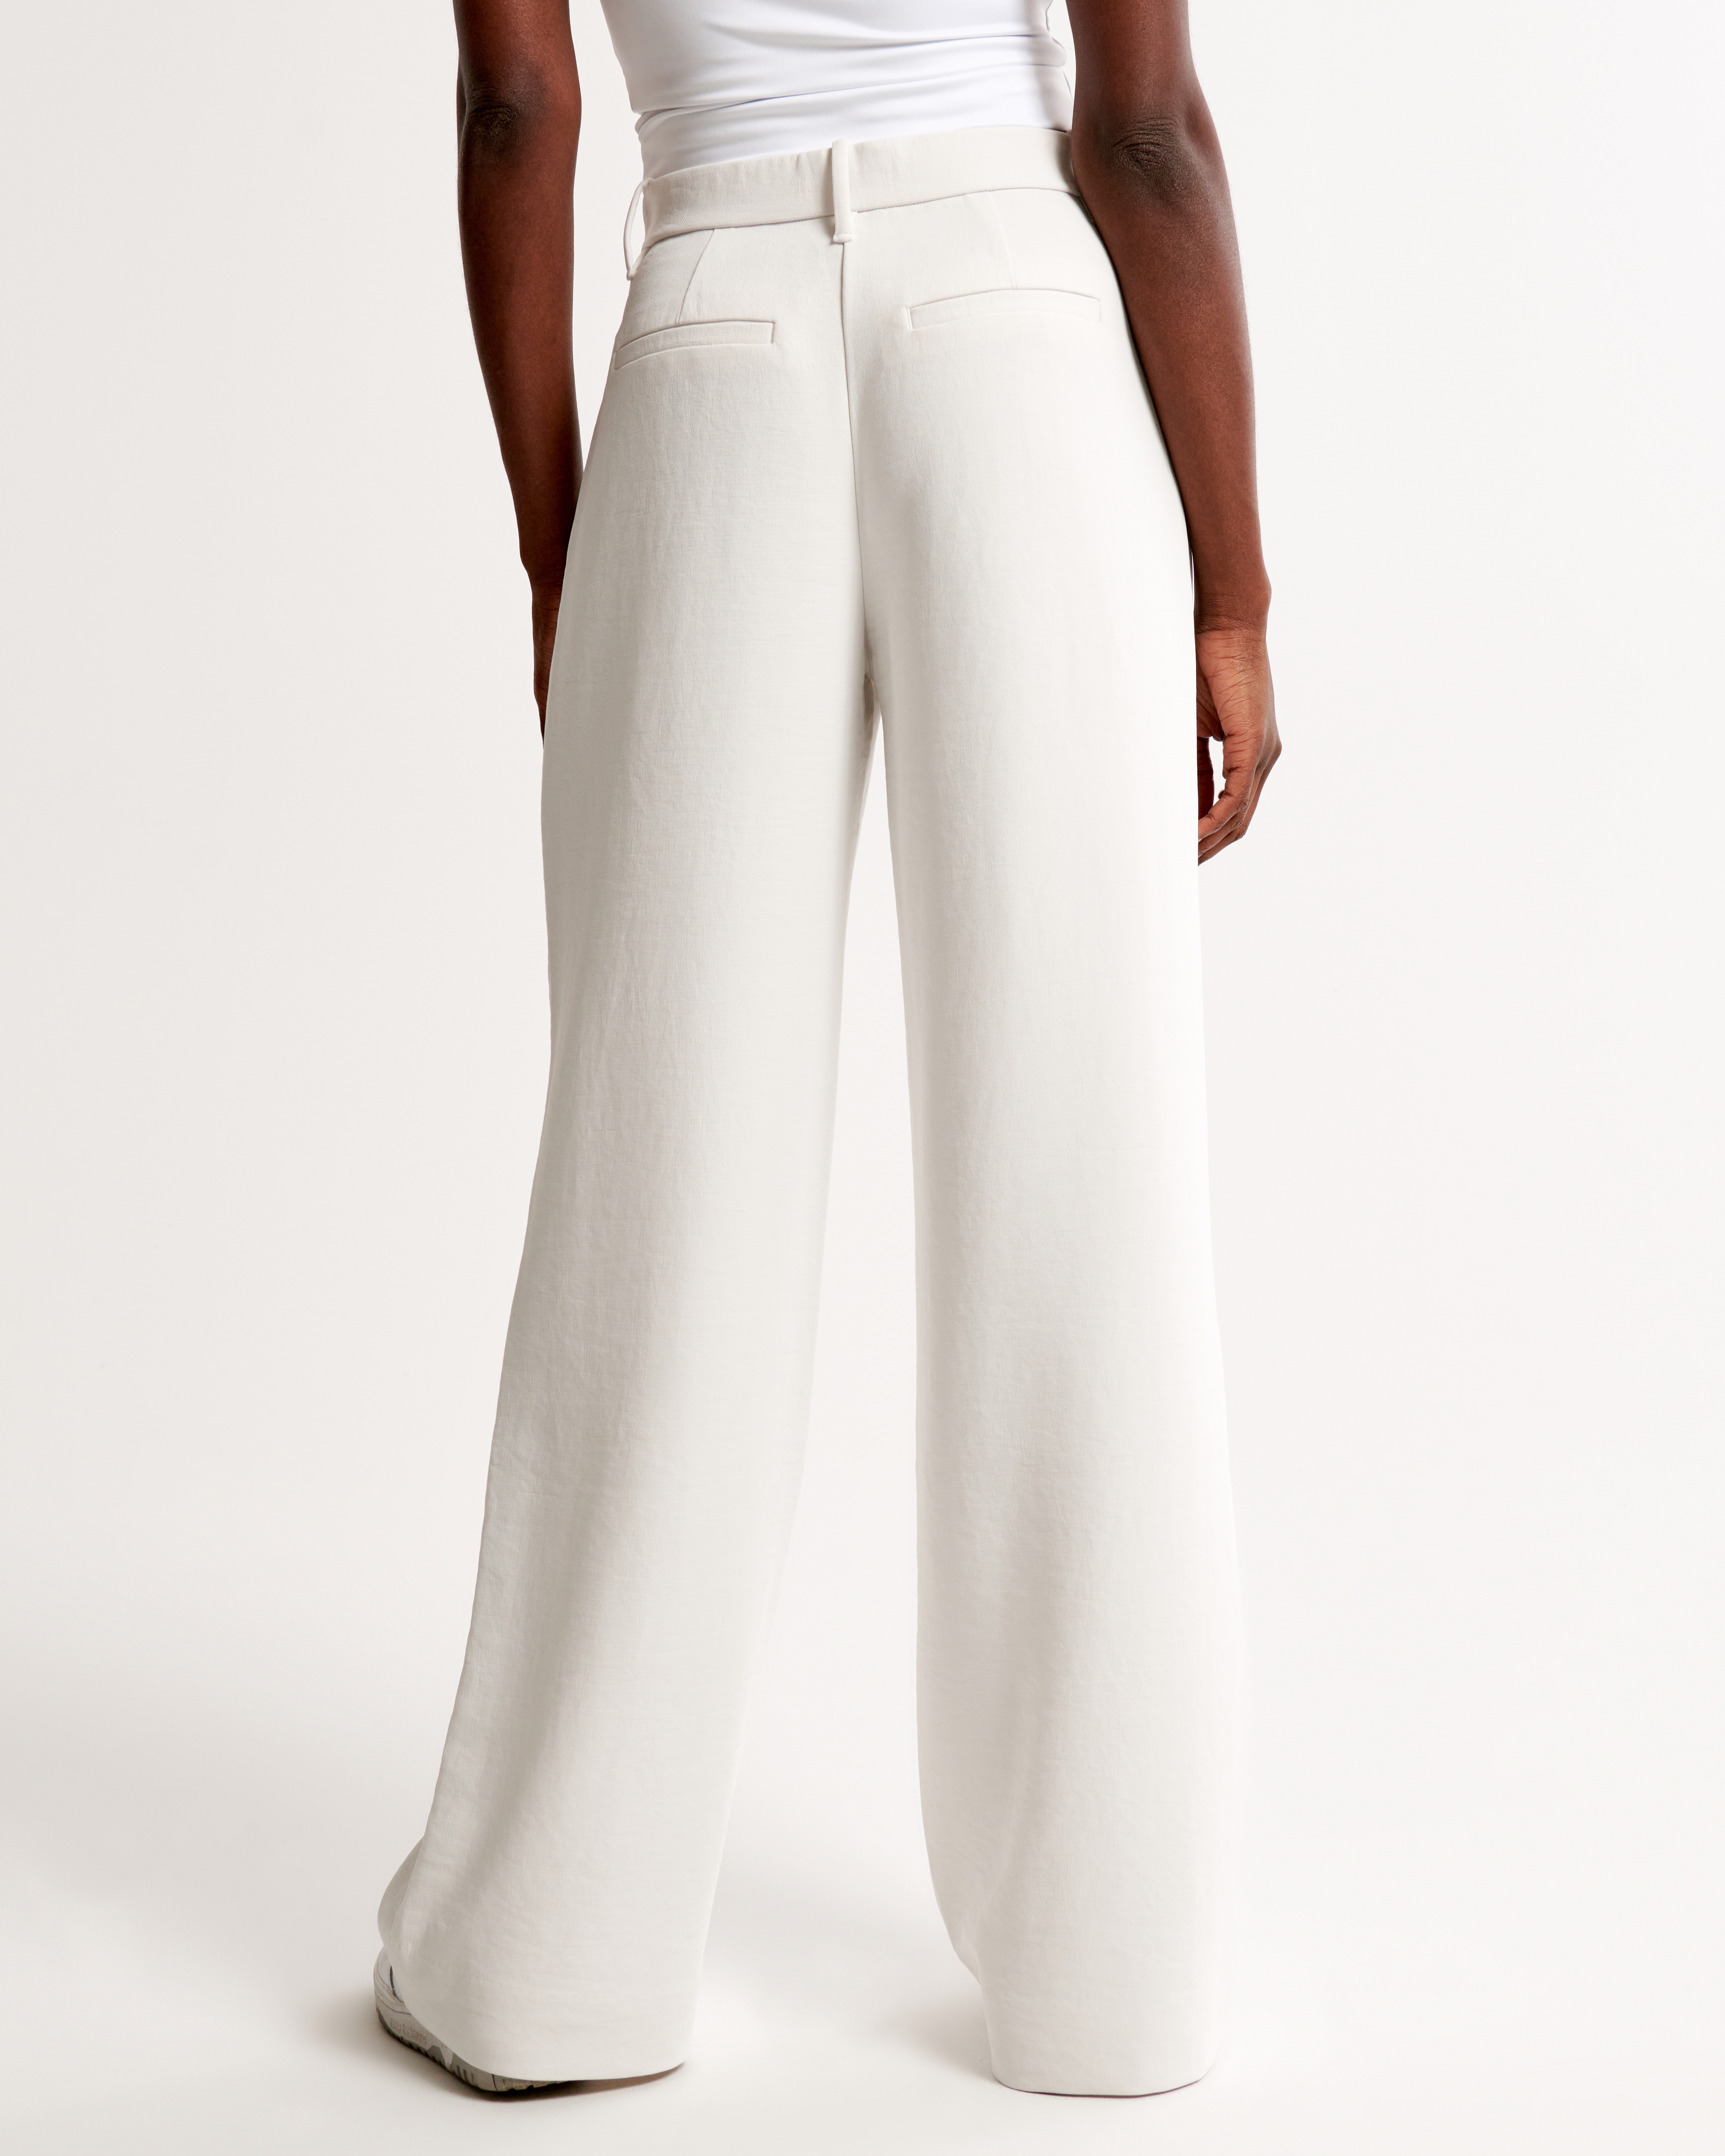 CrÃªpe Couture high-rise flared pants